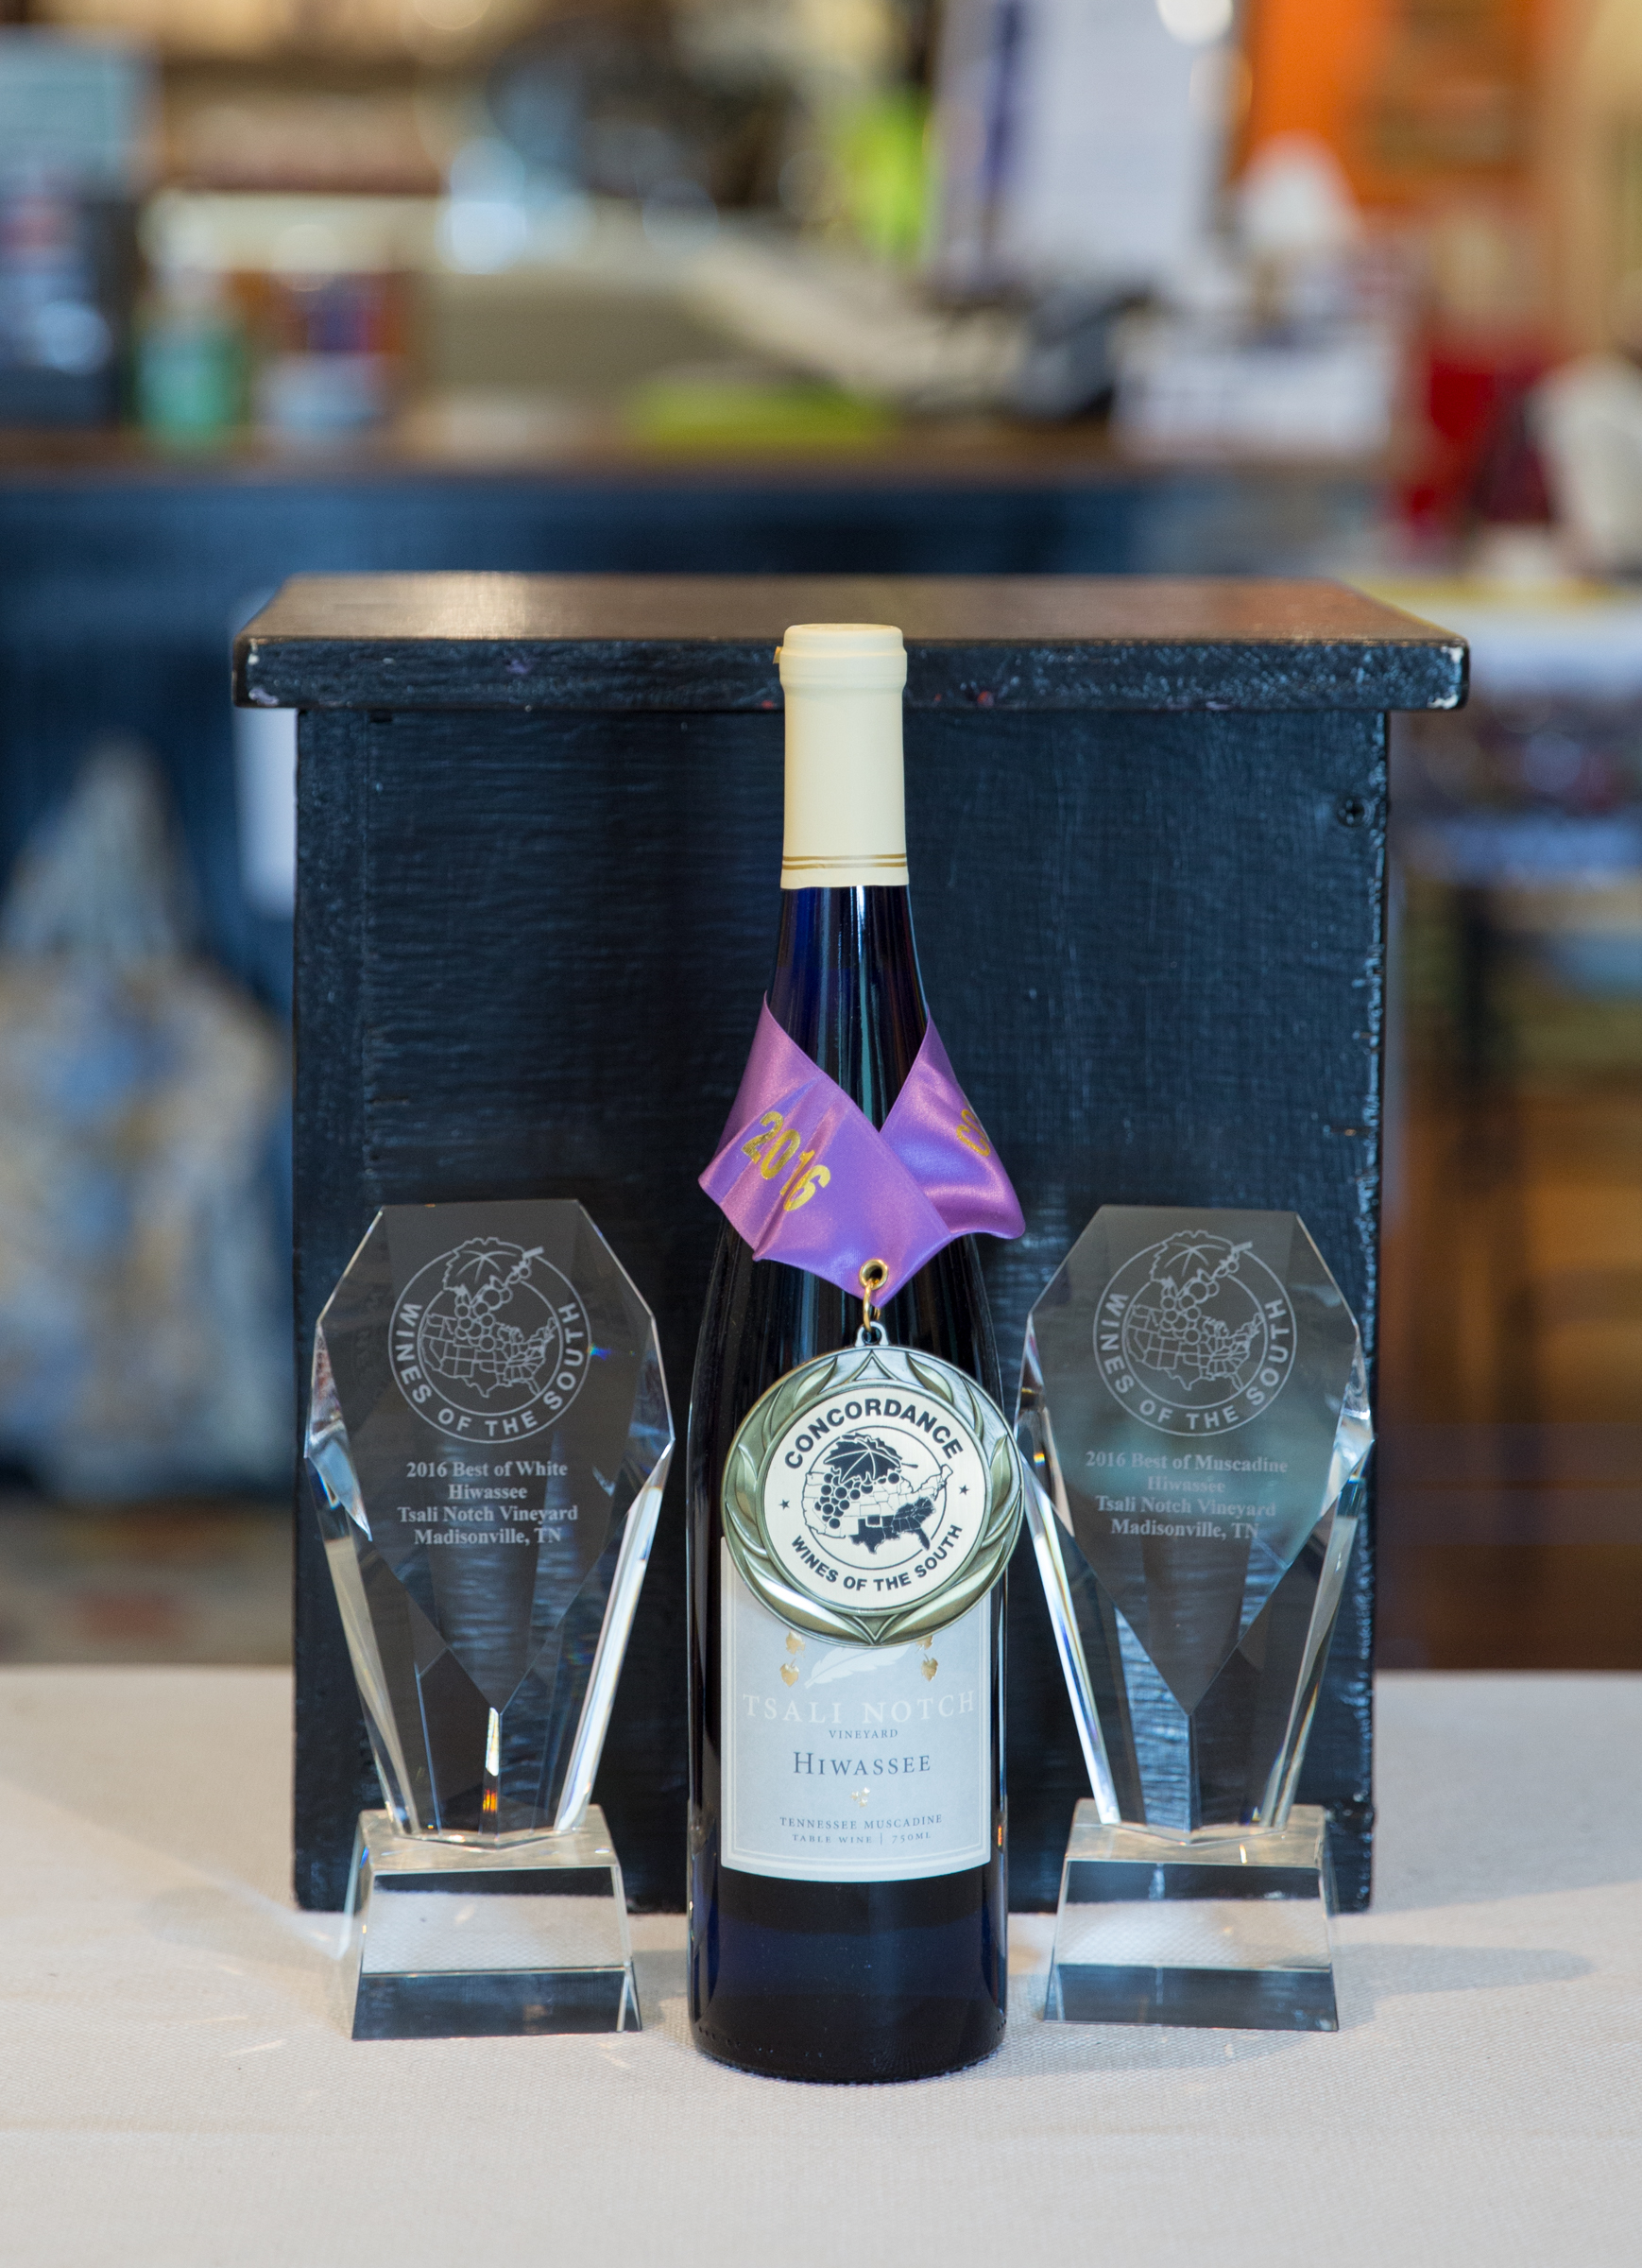 Hiwassee, a Muscadine wine from Tsali Notch Vineyard near Madisonville, TN, is the most highly decorated wine in TN history.